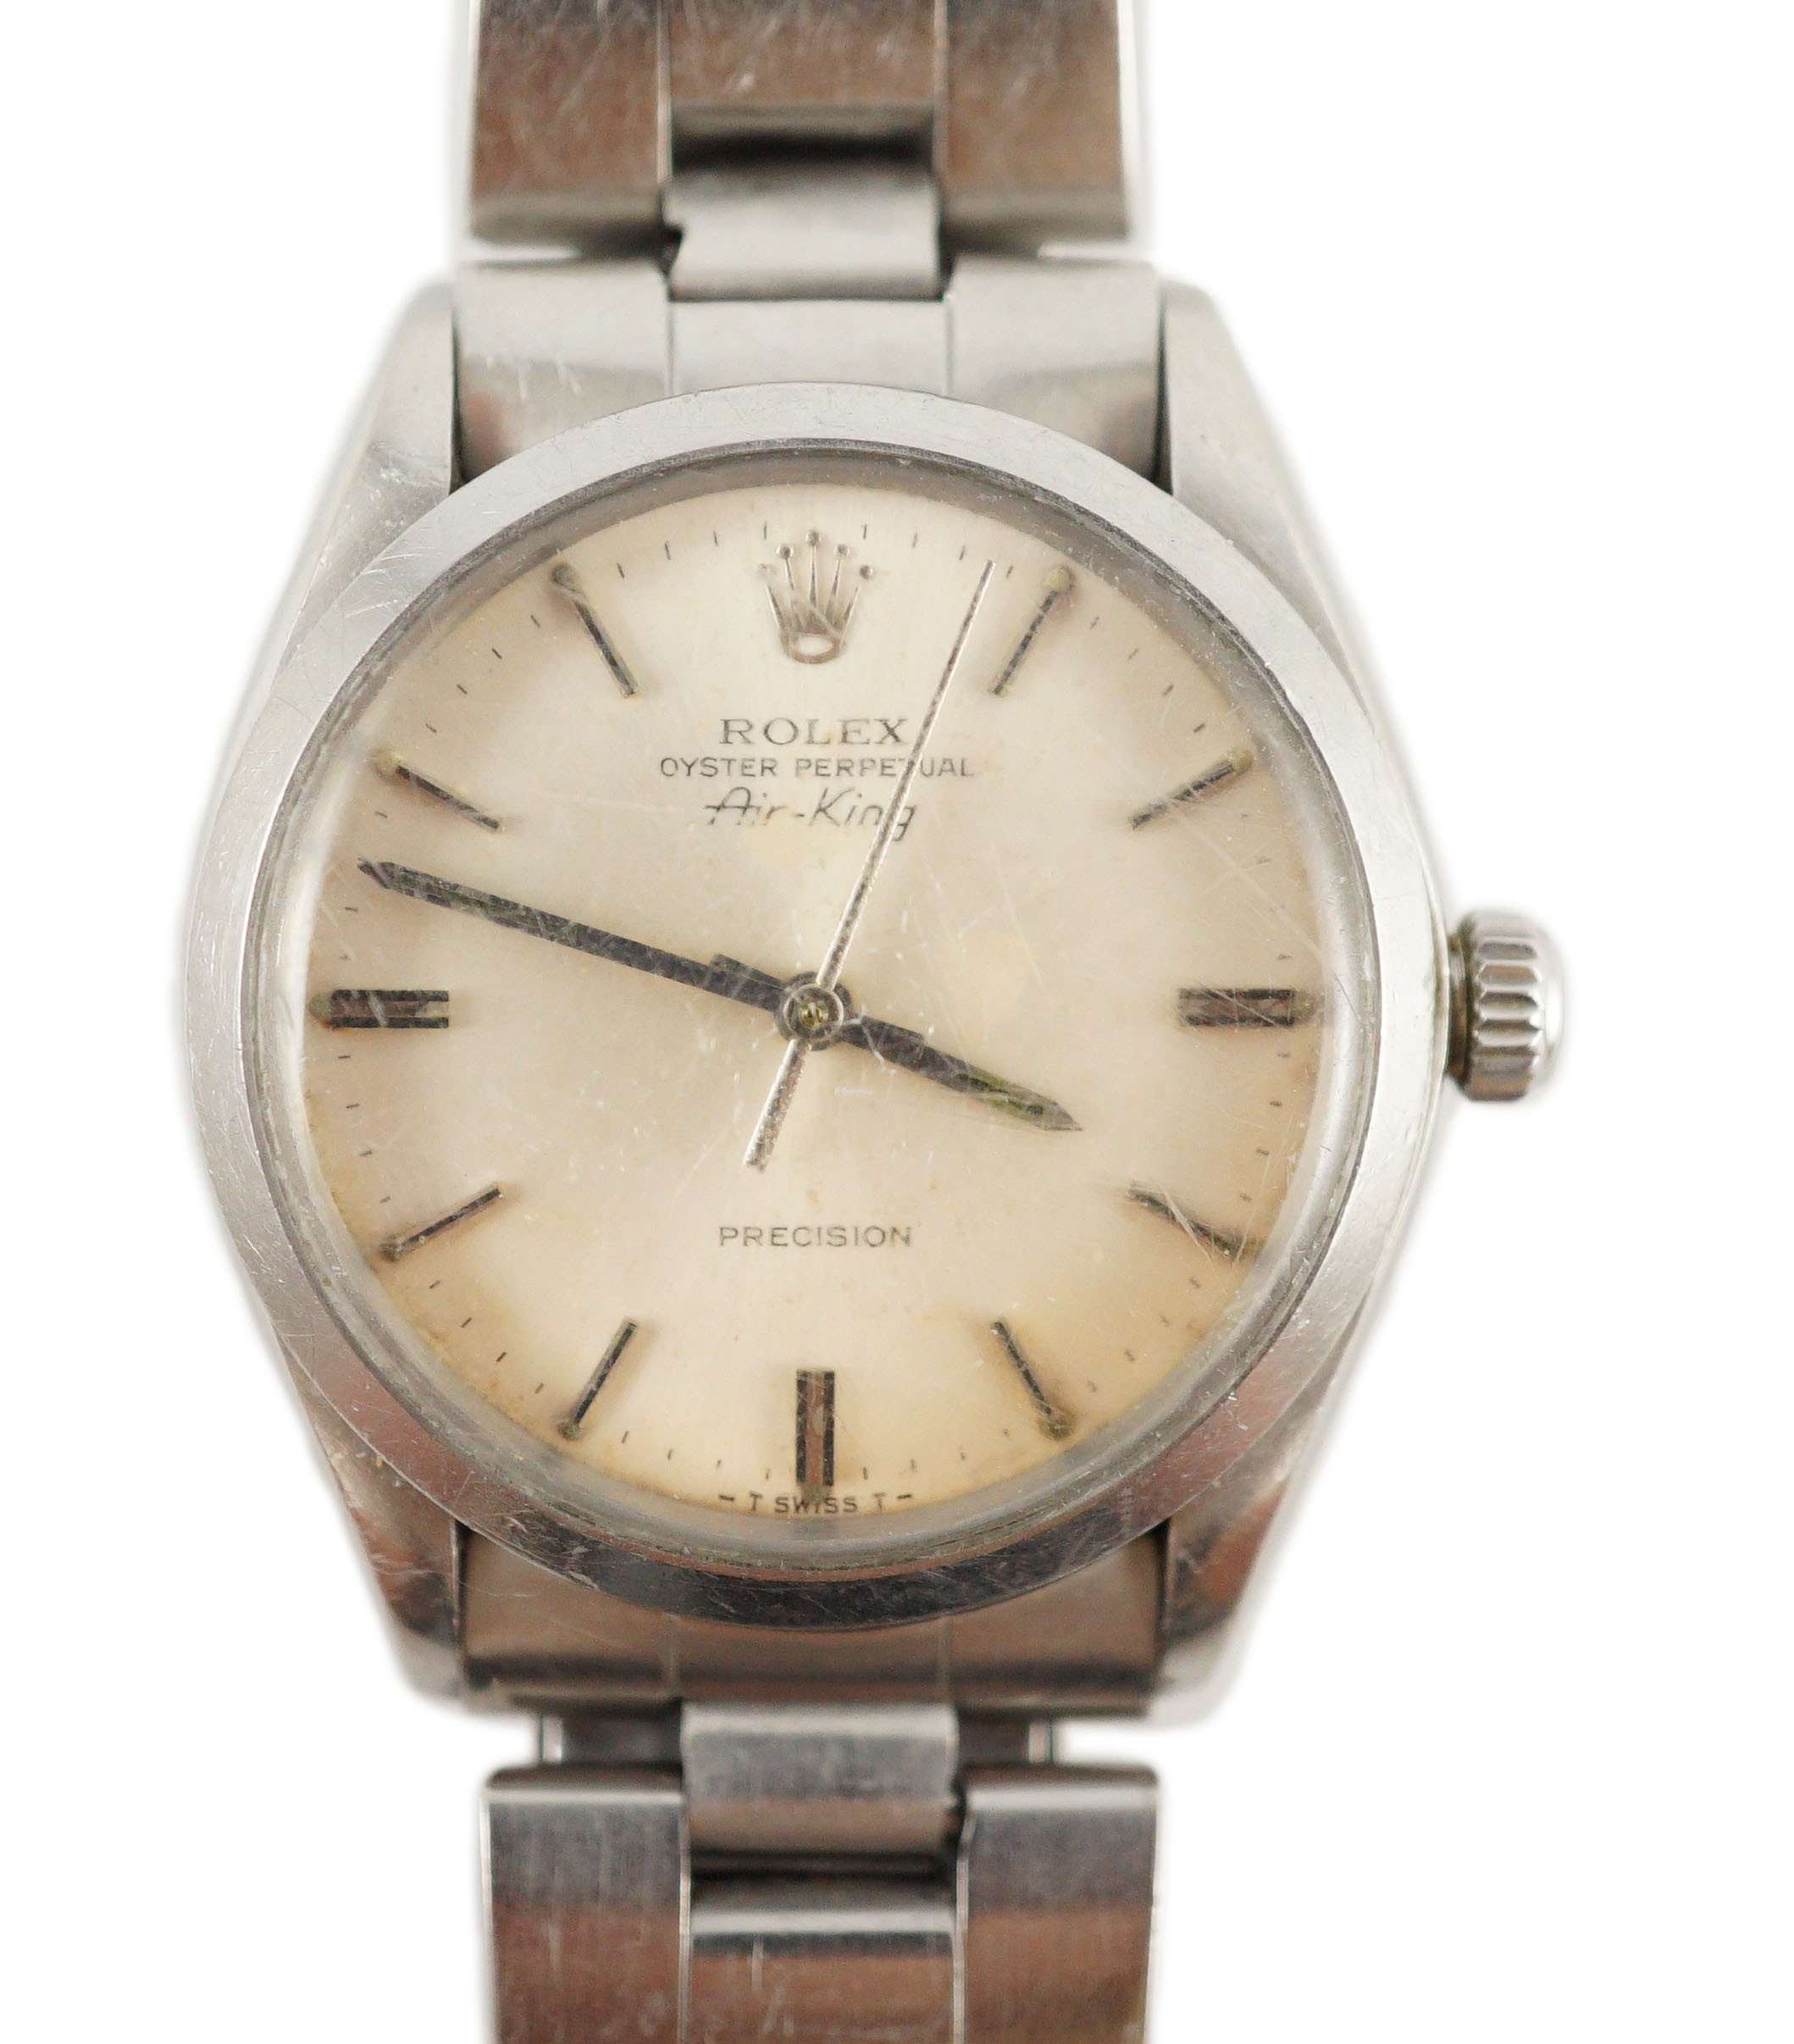 A gentleman's 1960's stainless steel Rolex Oyster Perpetual Air-King wrist watch, on a stainless steel Rolex bracelet